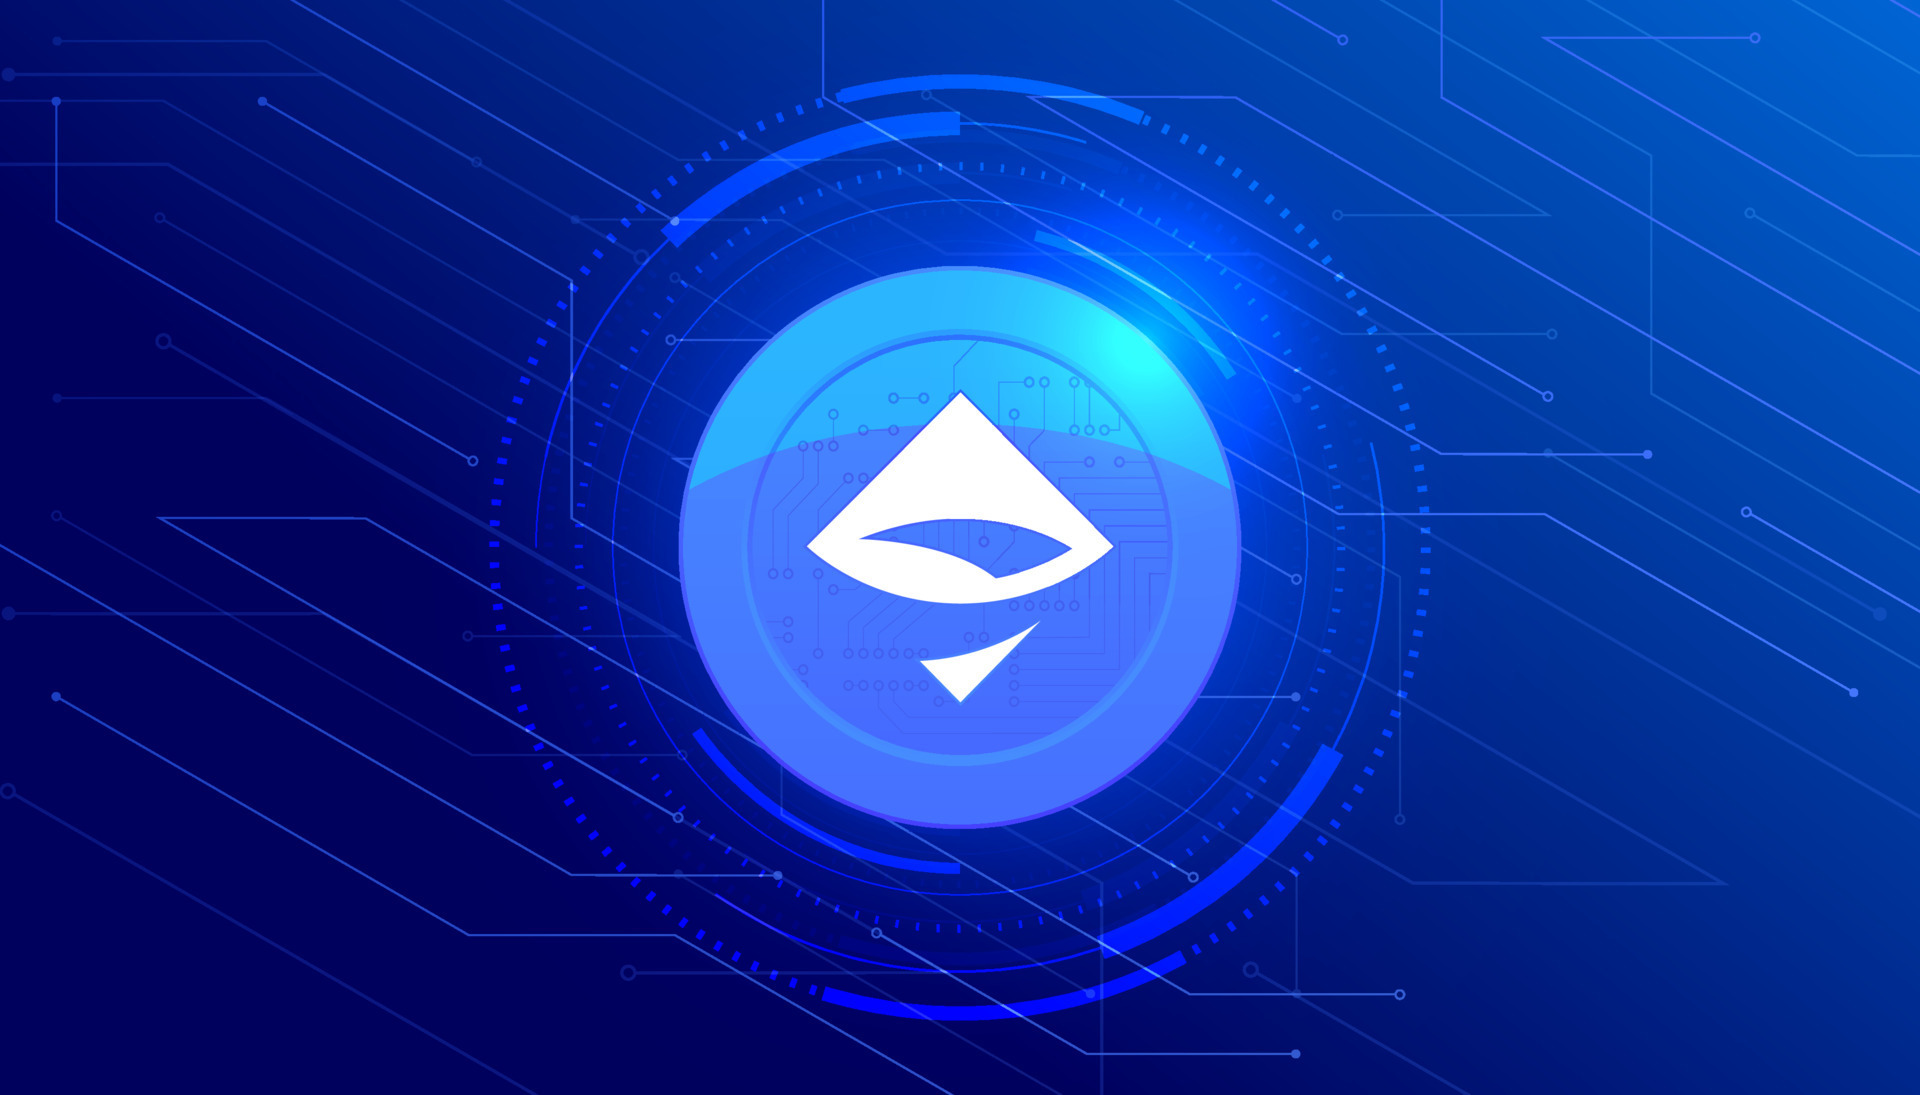 AirSwap Logo - Download AST Logo in png and svg AirSwap AST Logo - Coinpaper